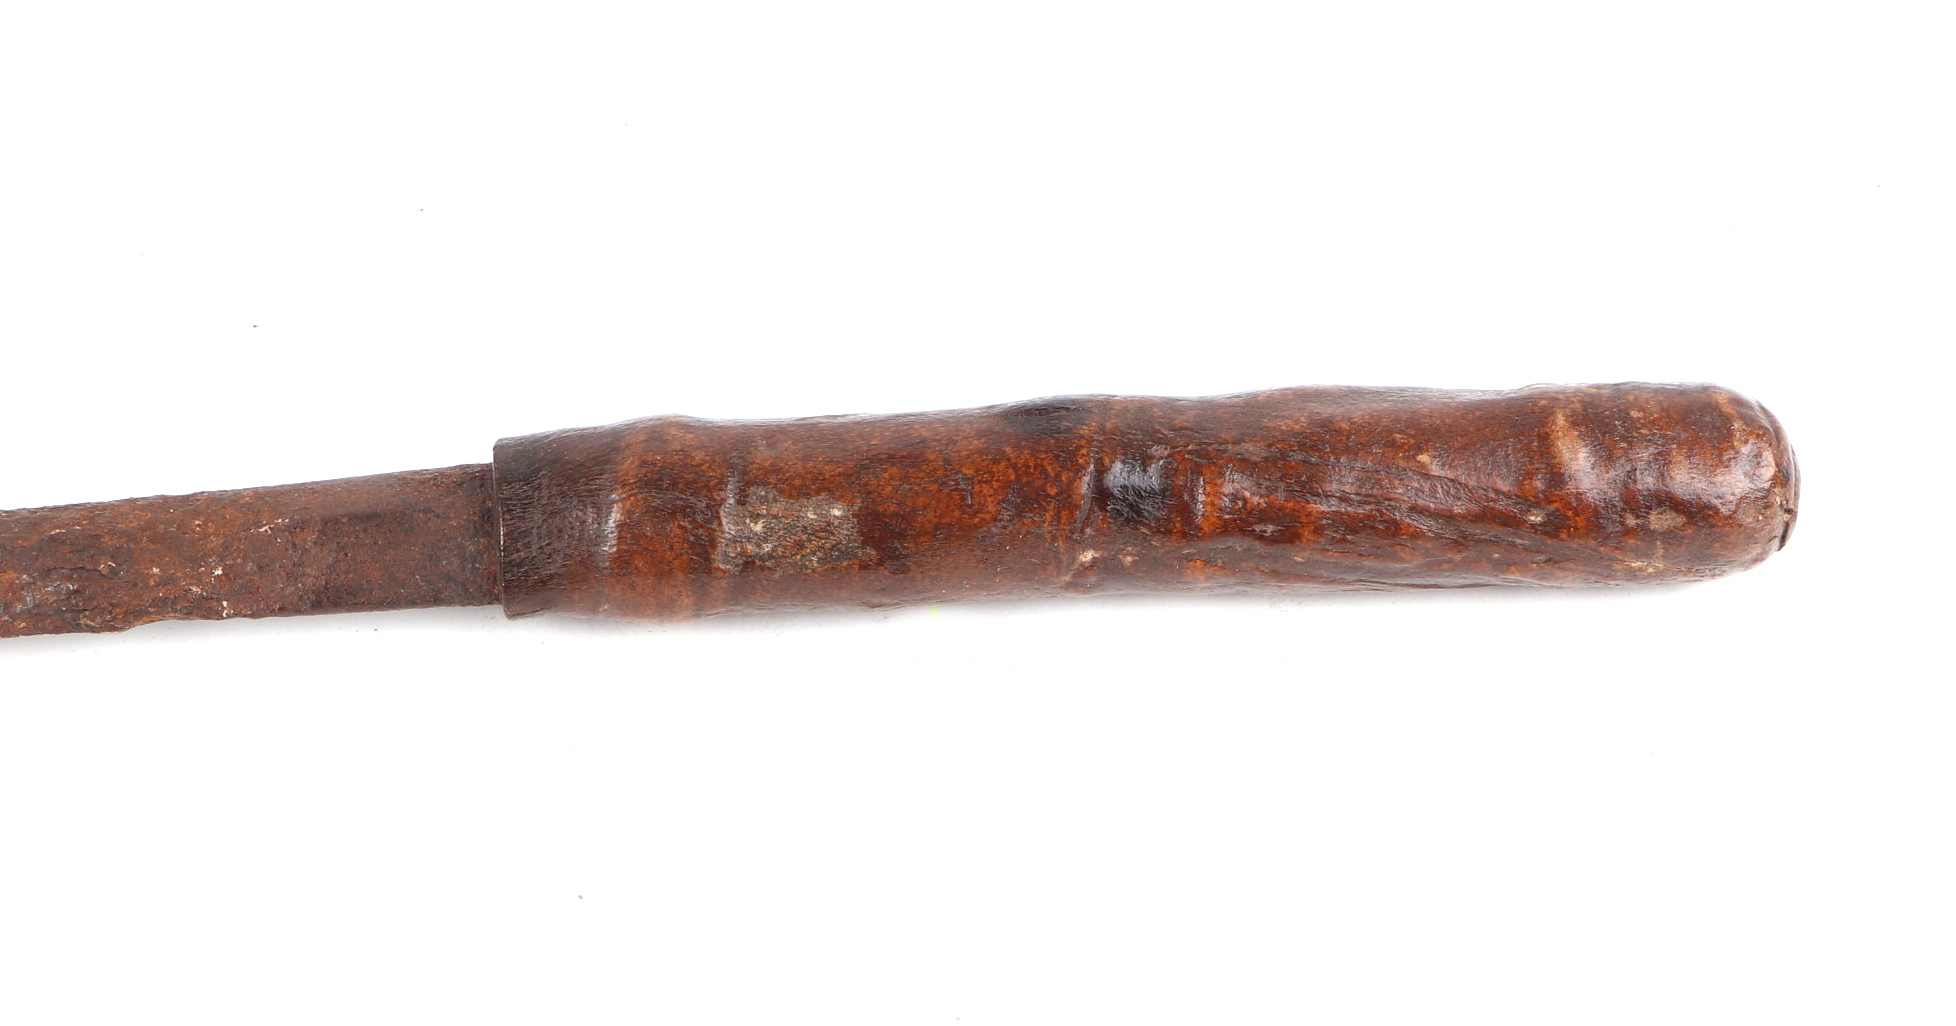 A Maasai Warrior Seme tribal sword, possible from the early 1900s, with leather scabbard, 64 long. - Image 3 of 4